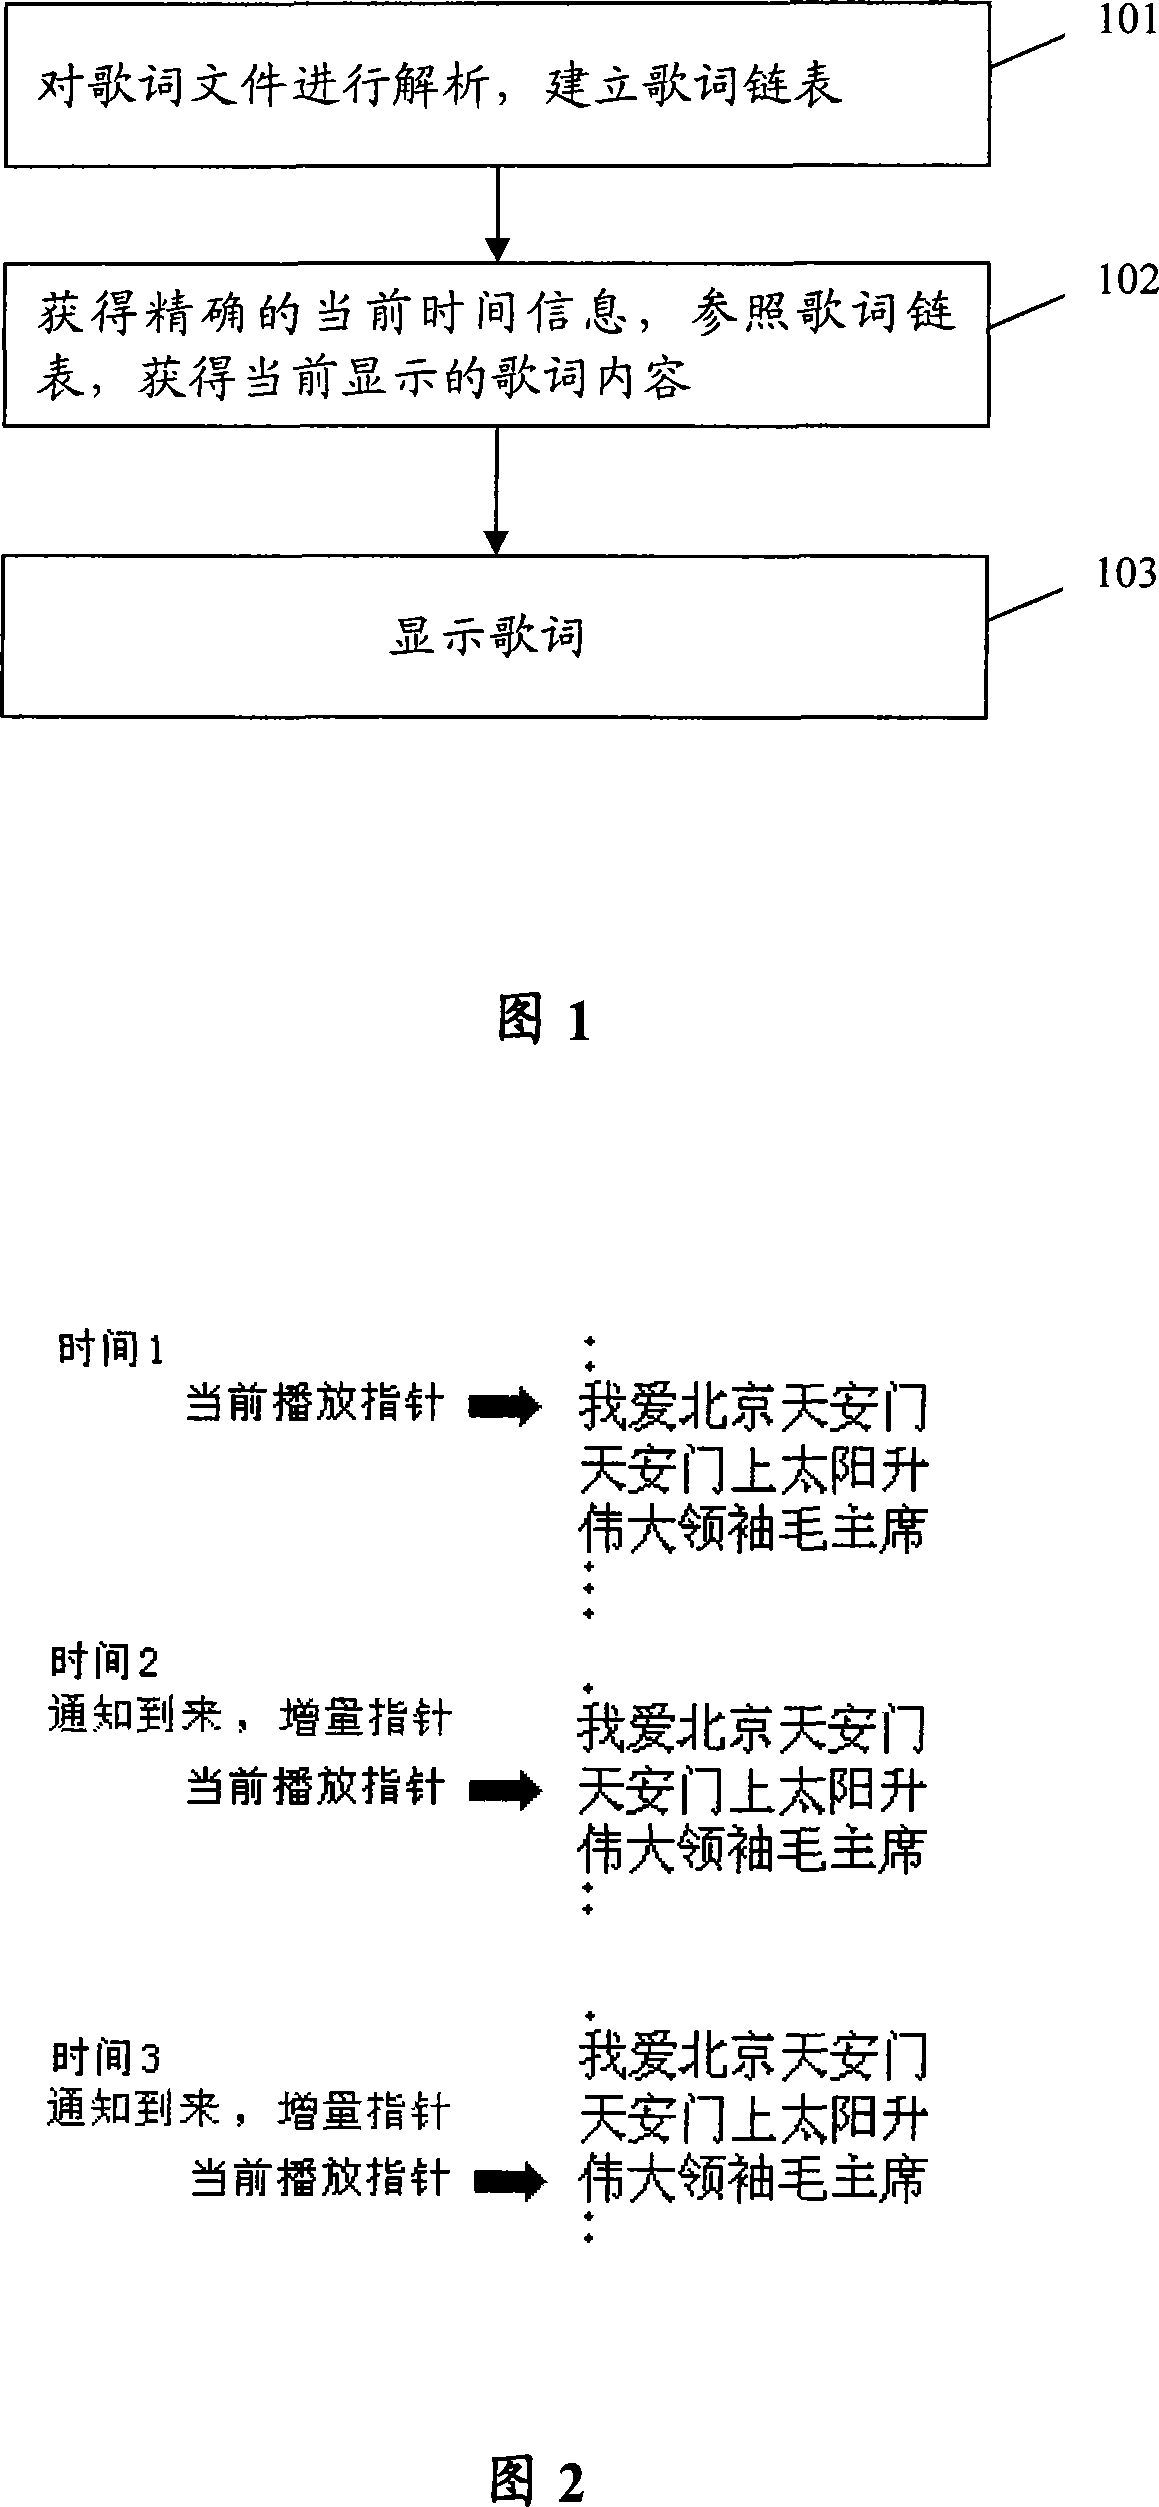 Method and device for implementing lyric synchronization when broadcasting song